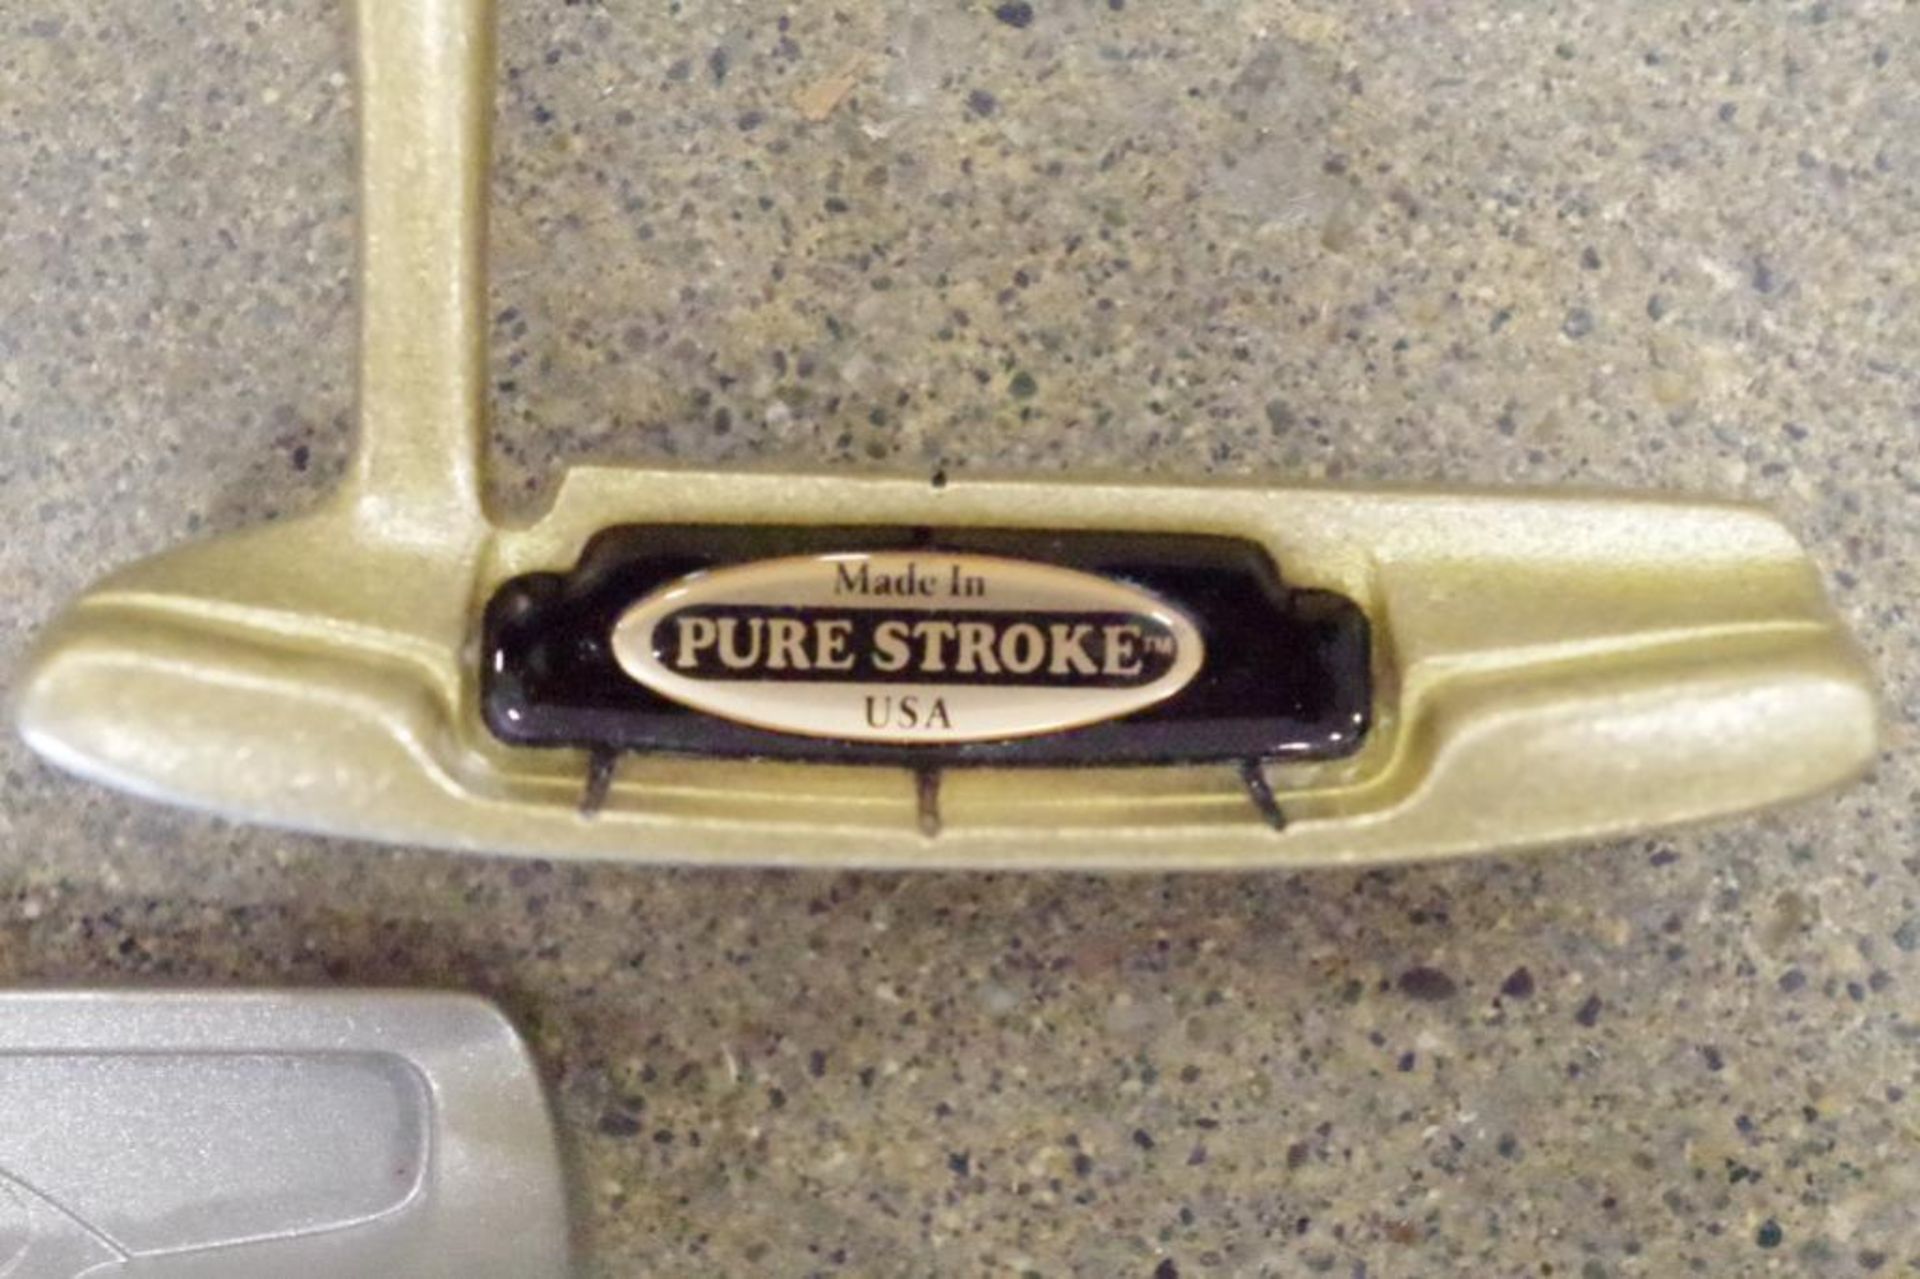 (2) NEW PURE STROKE Putters, 1-Gold, 1-Silver Colored, Made in USA - Image 3 of 5